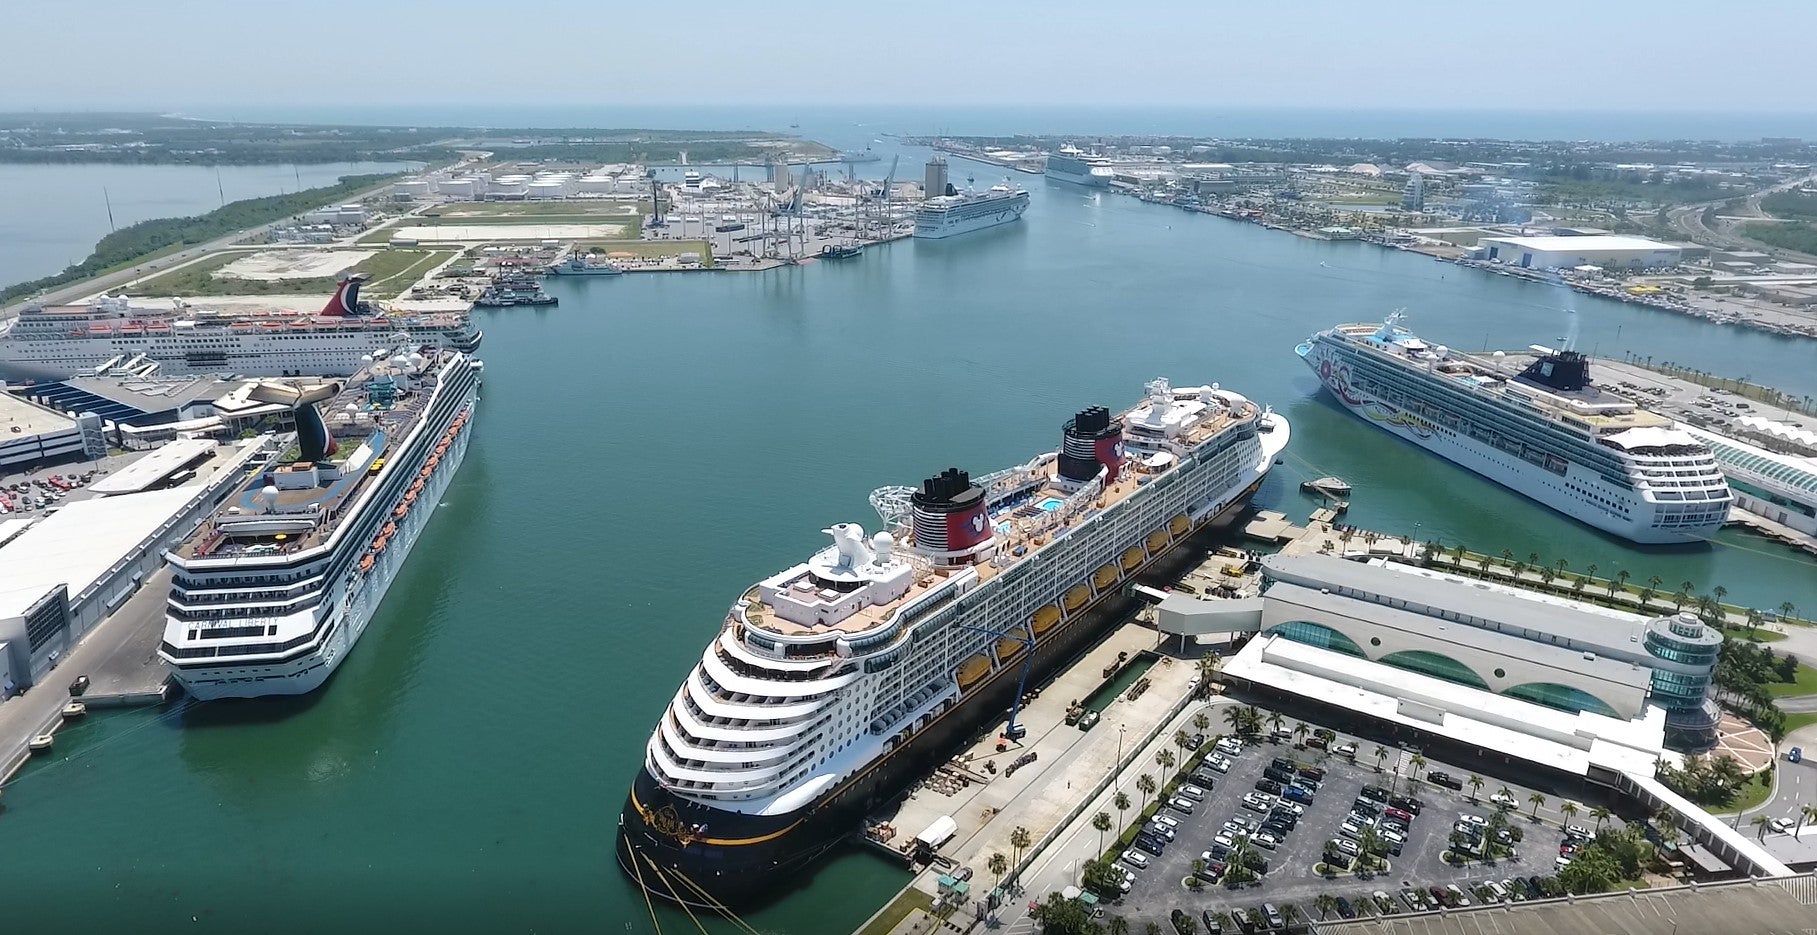 tours from port canaveral